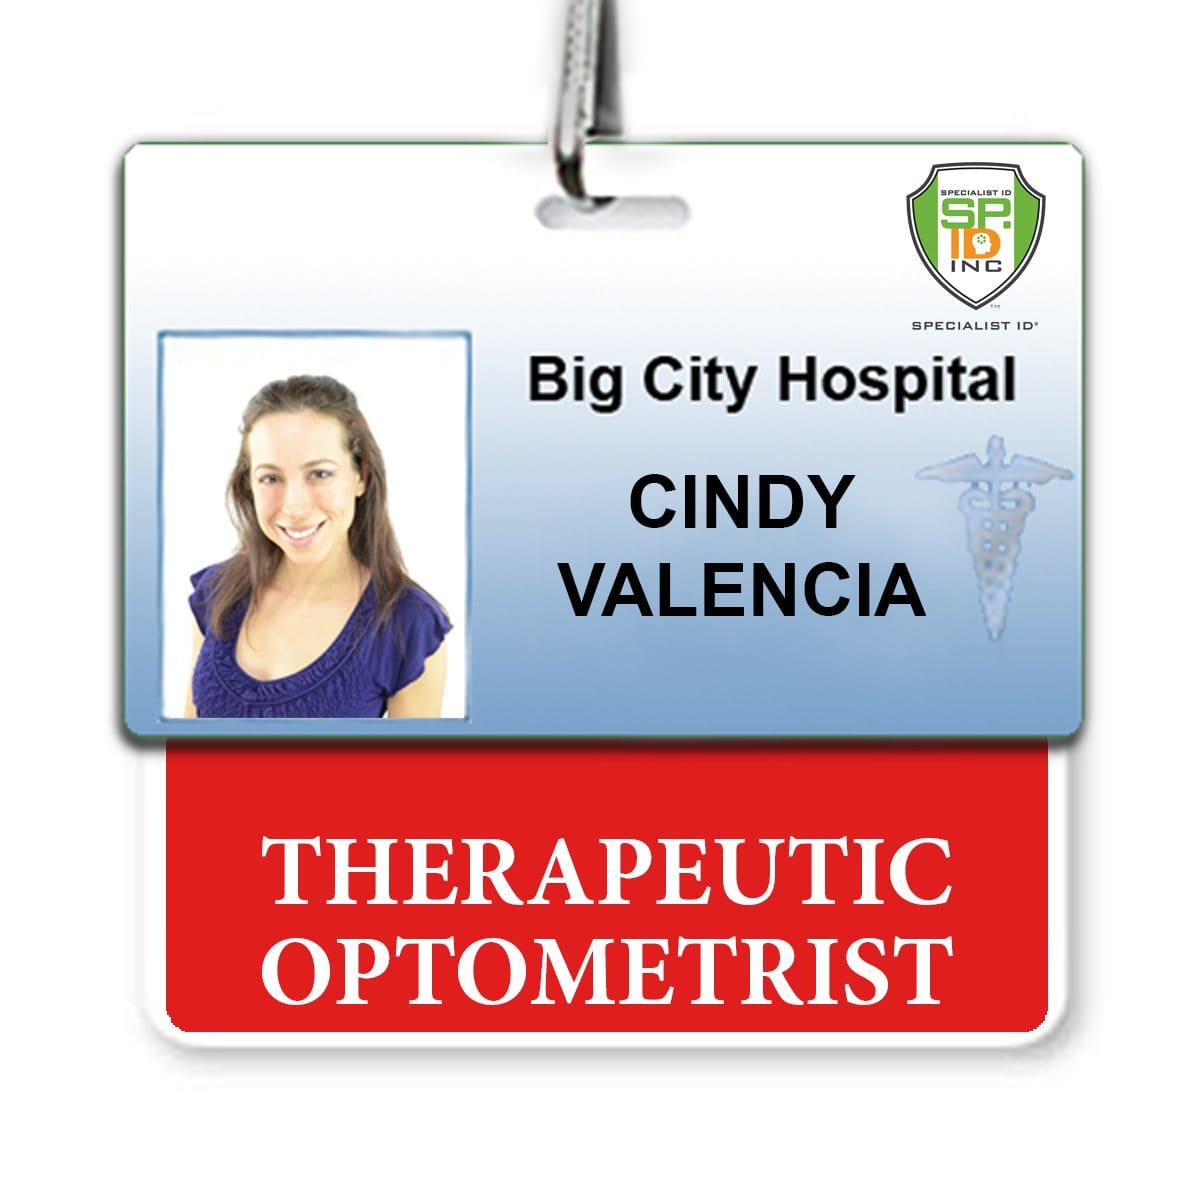 Red "Therapeutic Optometrist" Horizontal Badge Buddy with Red Border BB-THERAPEUTICOPTOMETRIS-RED-H